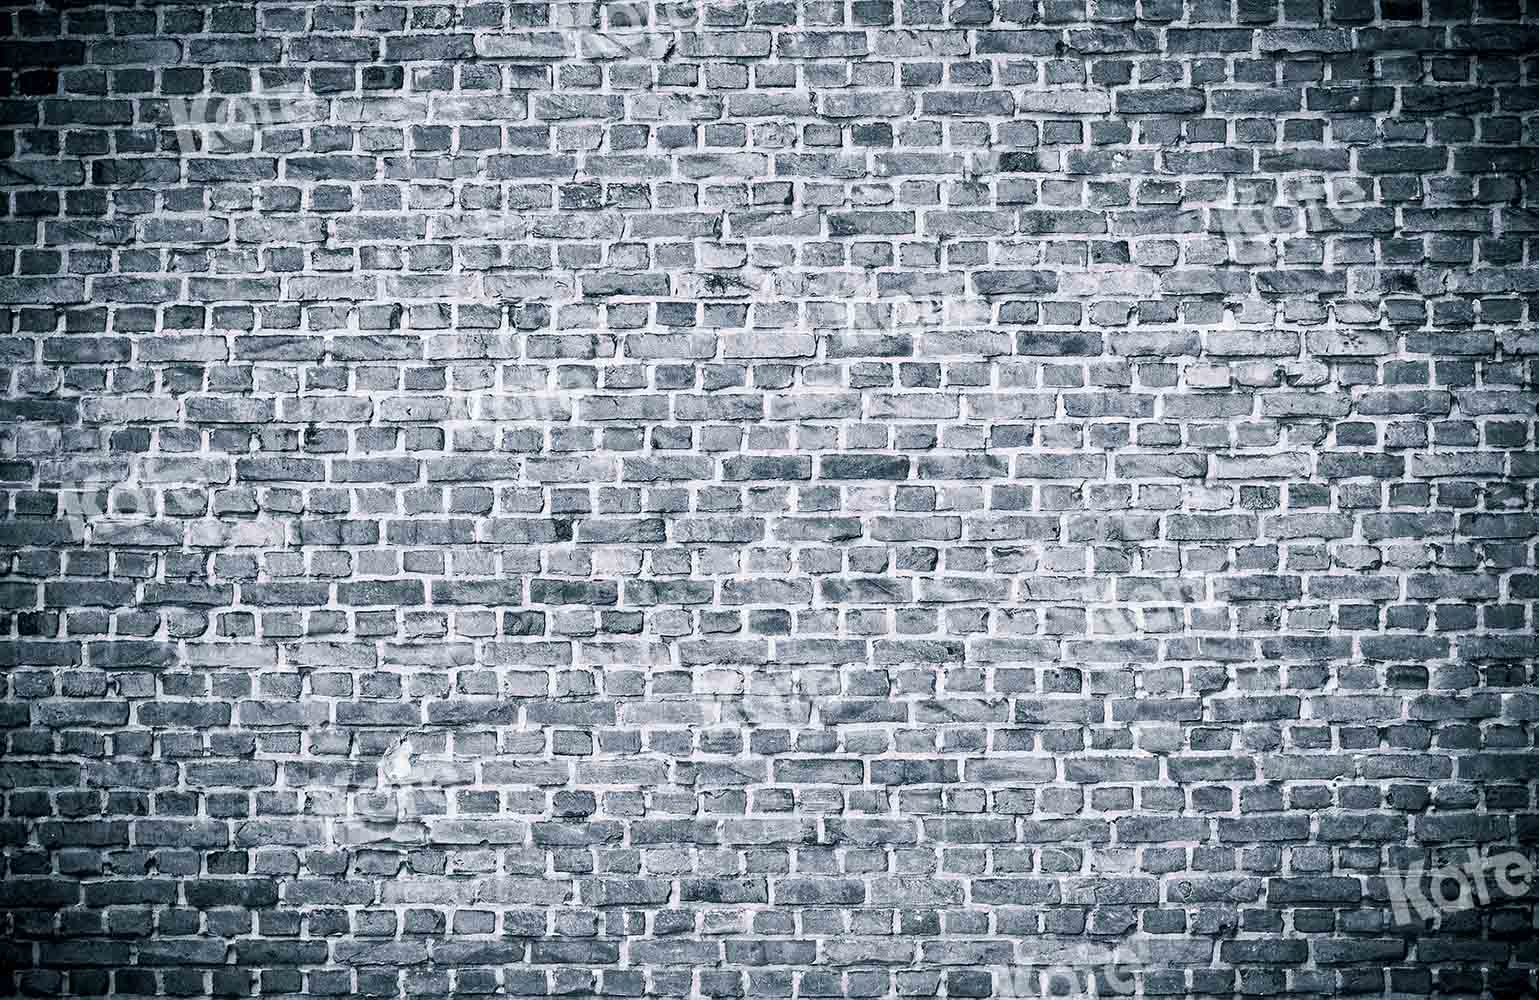 Kate Retro Brick Old Wall Background for Photography Designed by Chain Photography